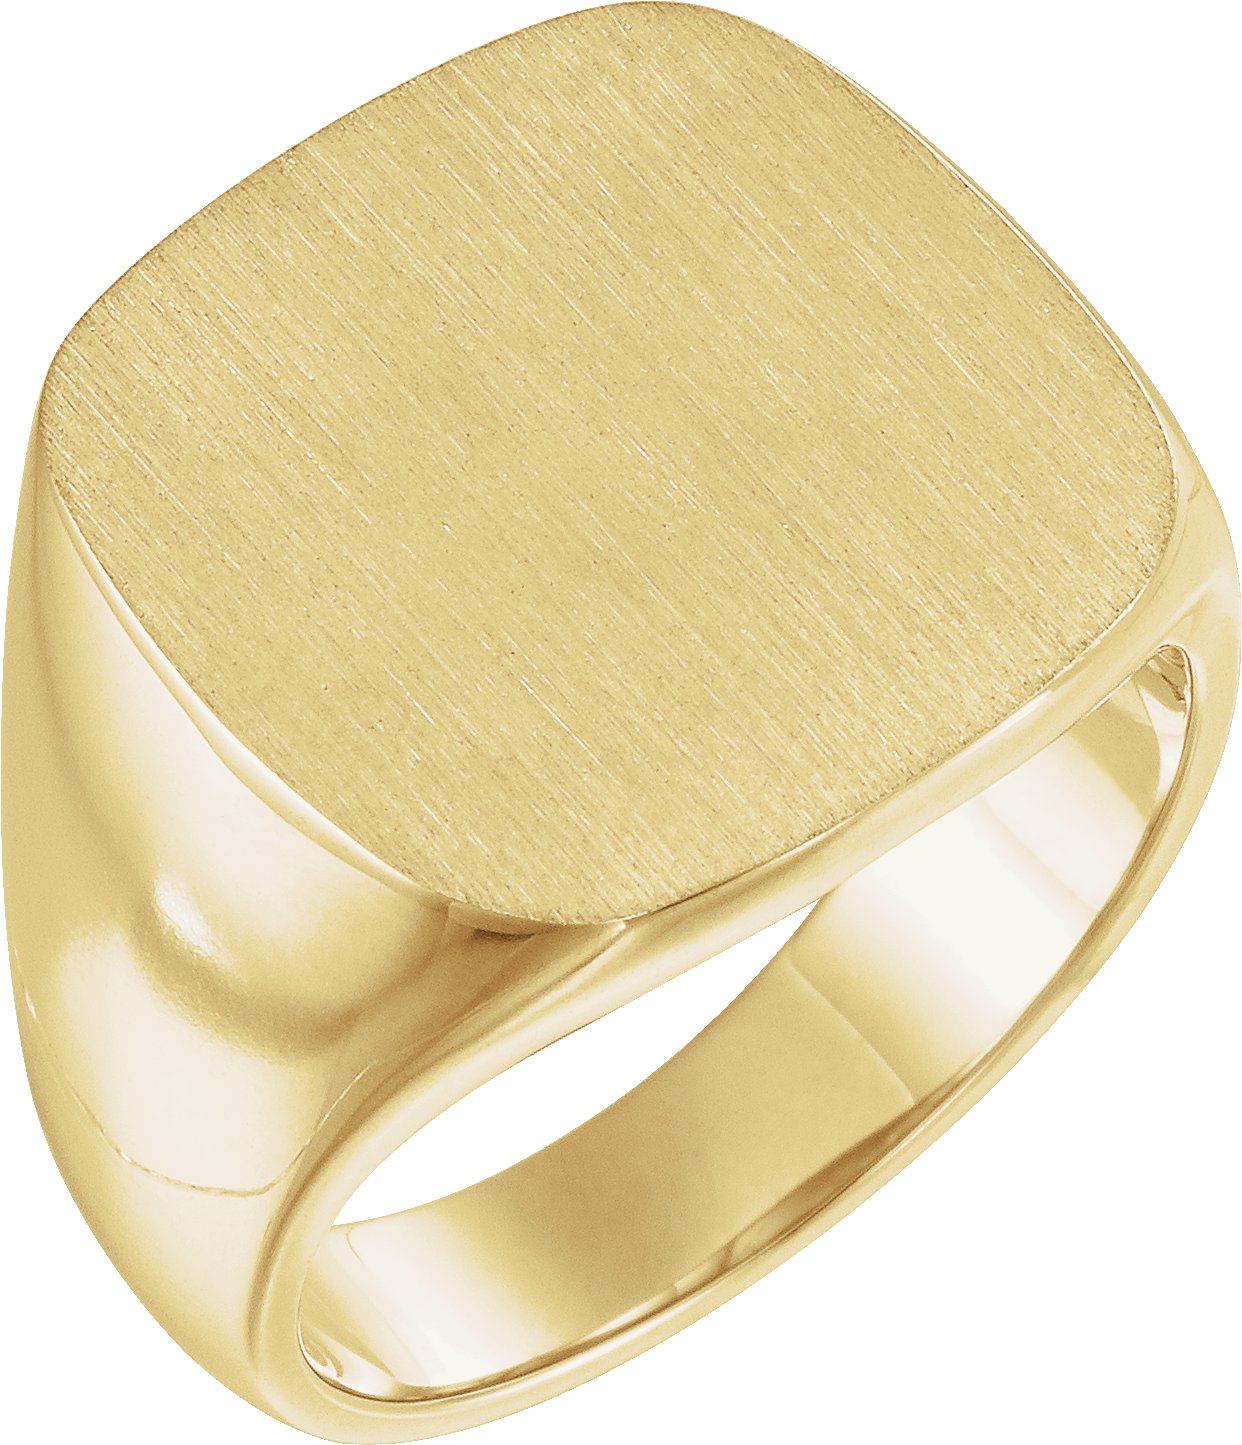 14K Yellow 18 mm Square Signet Ring with Brush Finished Top